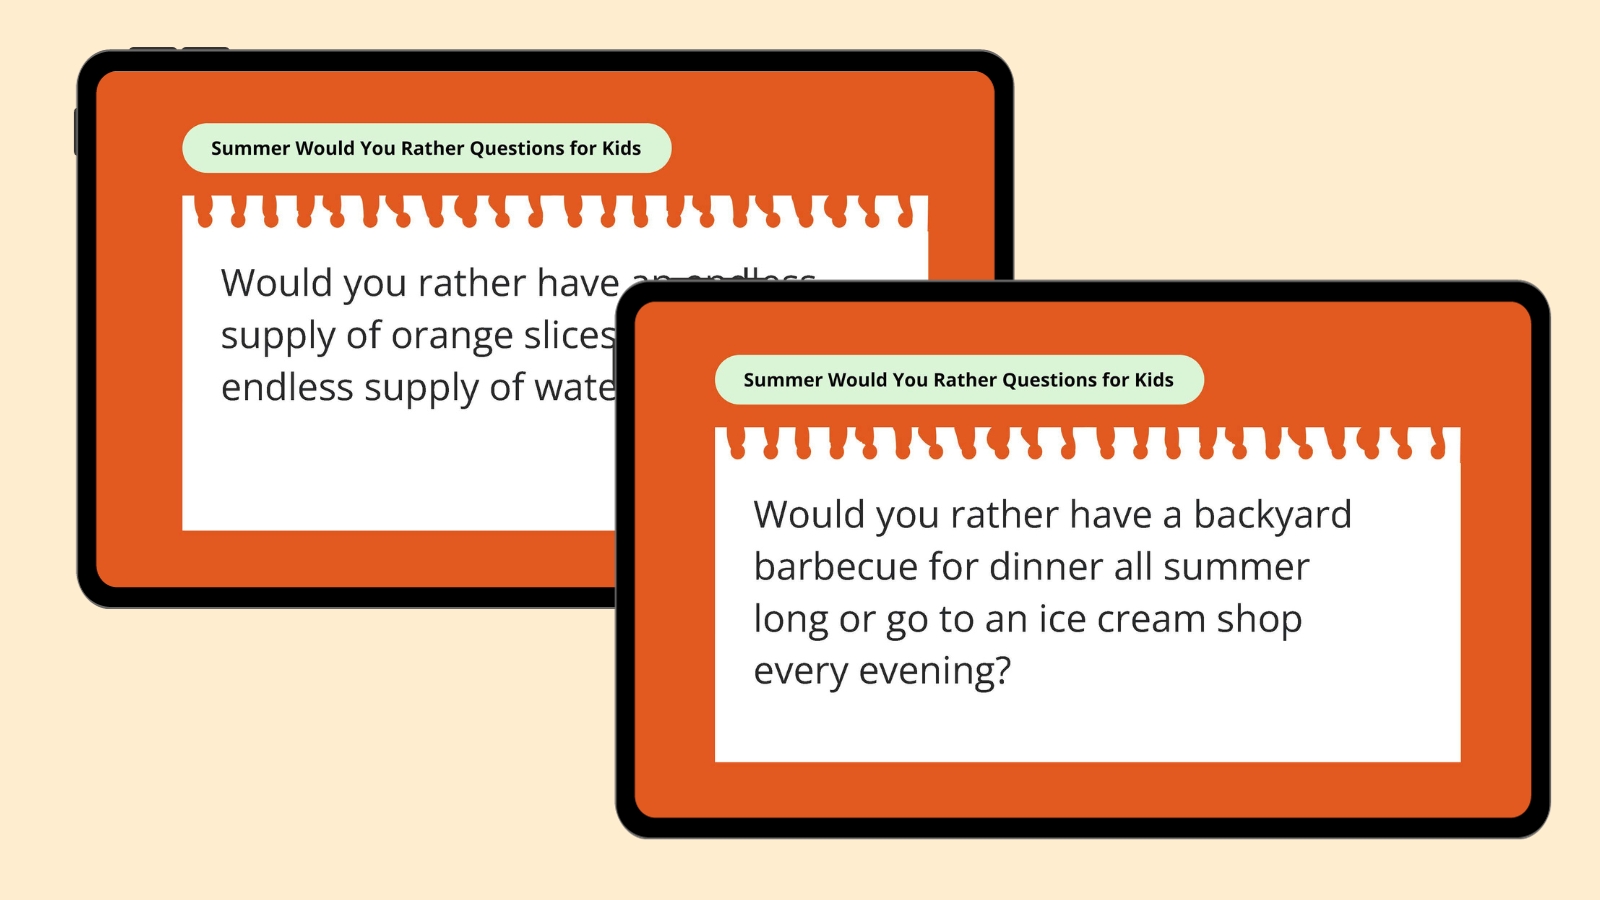 Would you rather have a backyard barbecue for dinner all summer long or go to an ice cream shop every evening?- would you rather questions for kids